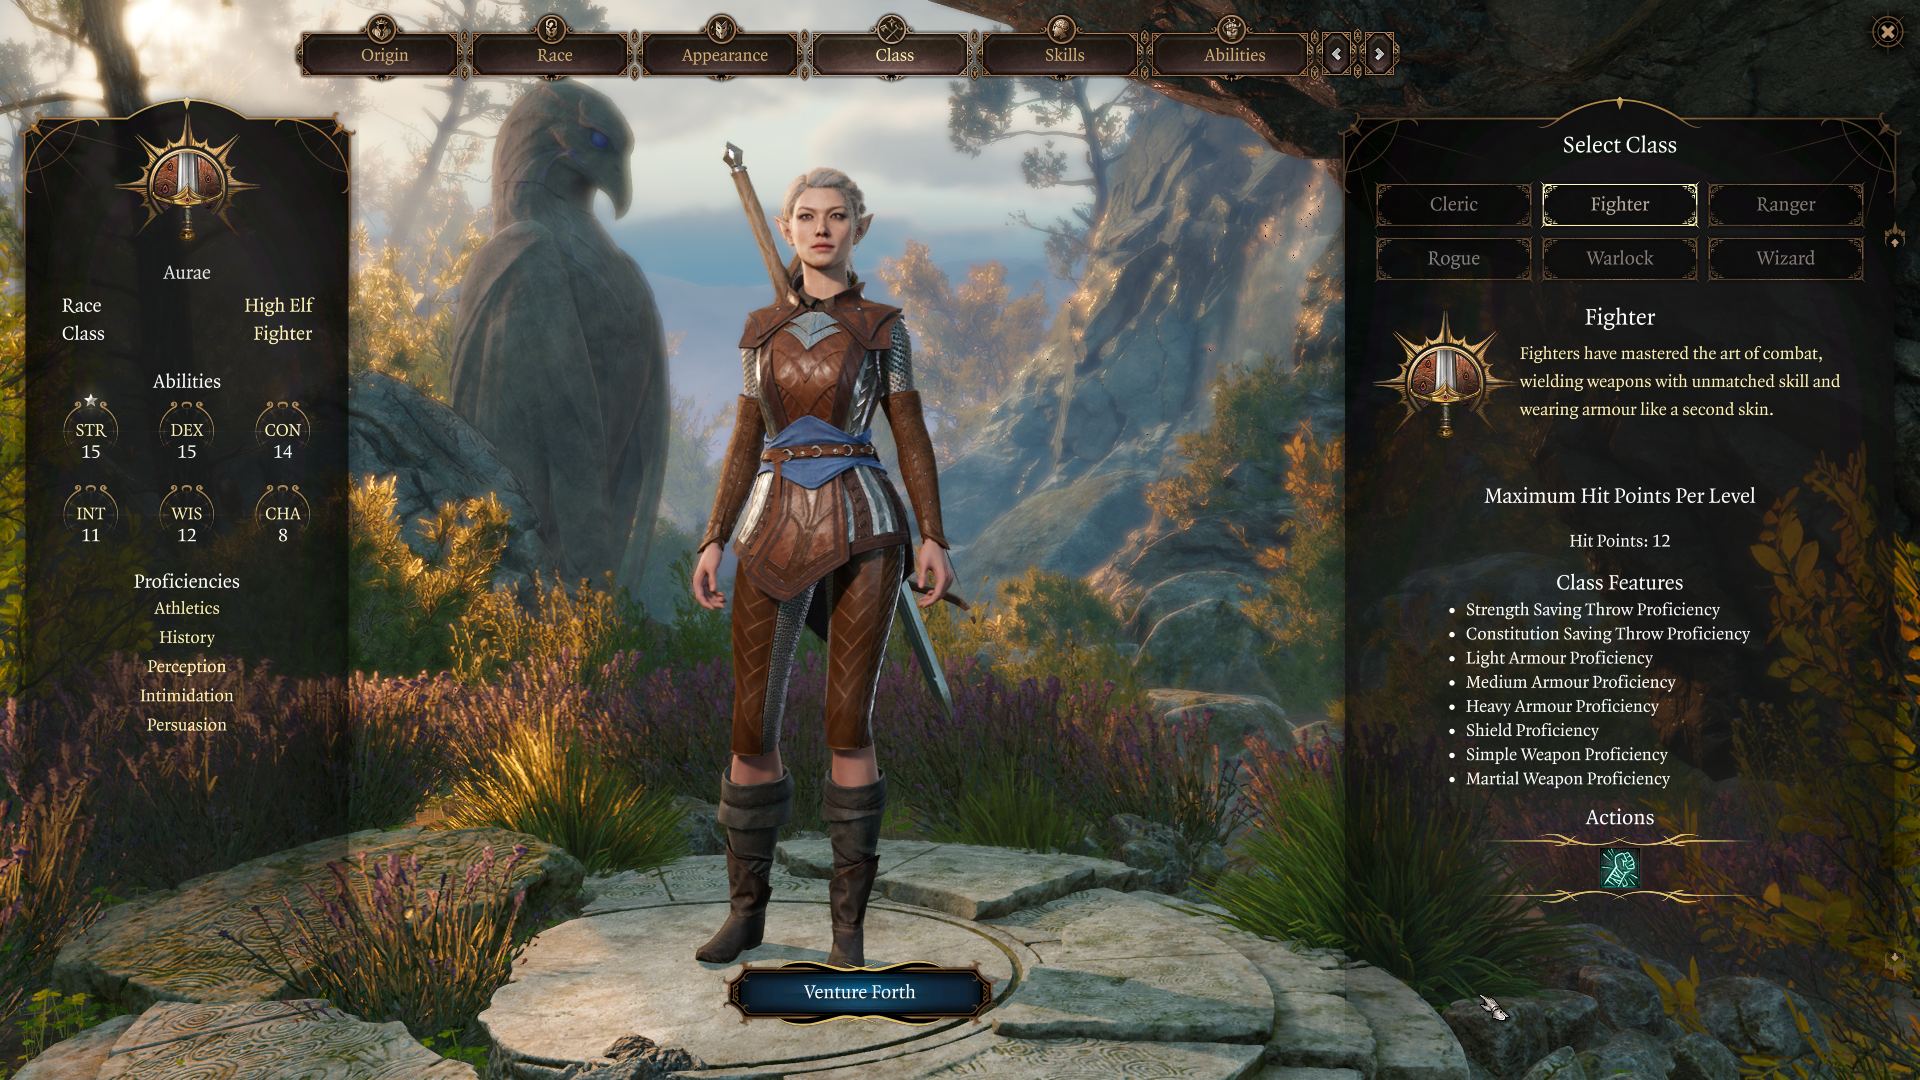 Baldur's Gate 3 classes: a High-Elf Fighter in the character creation screen.